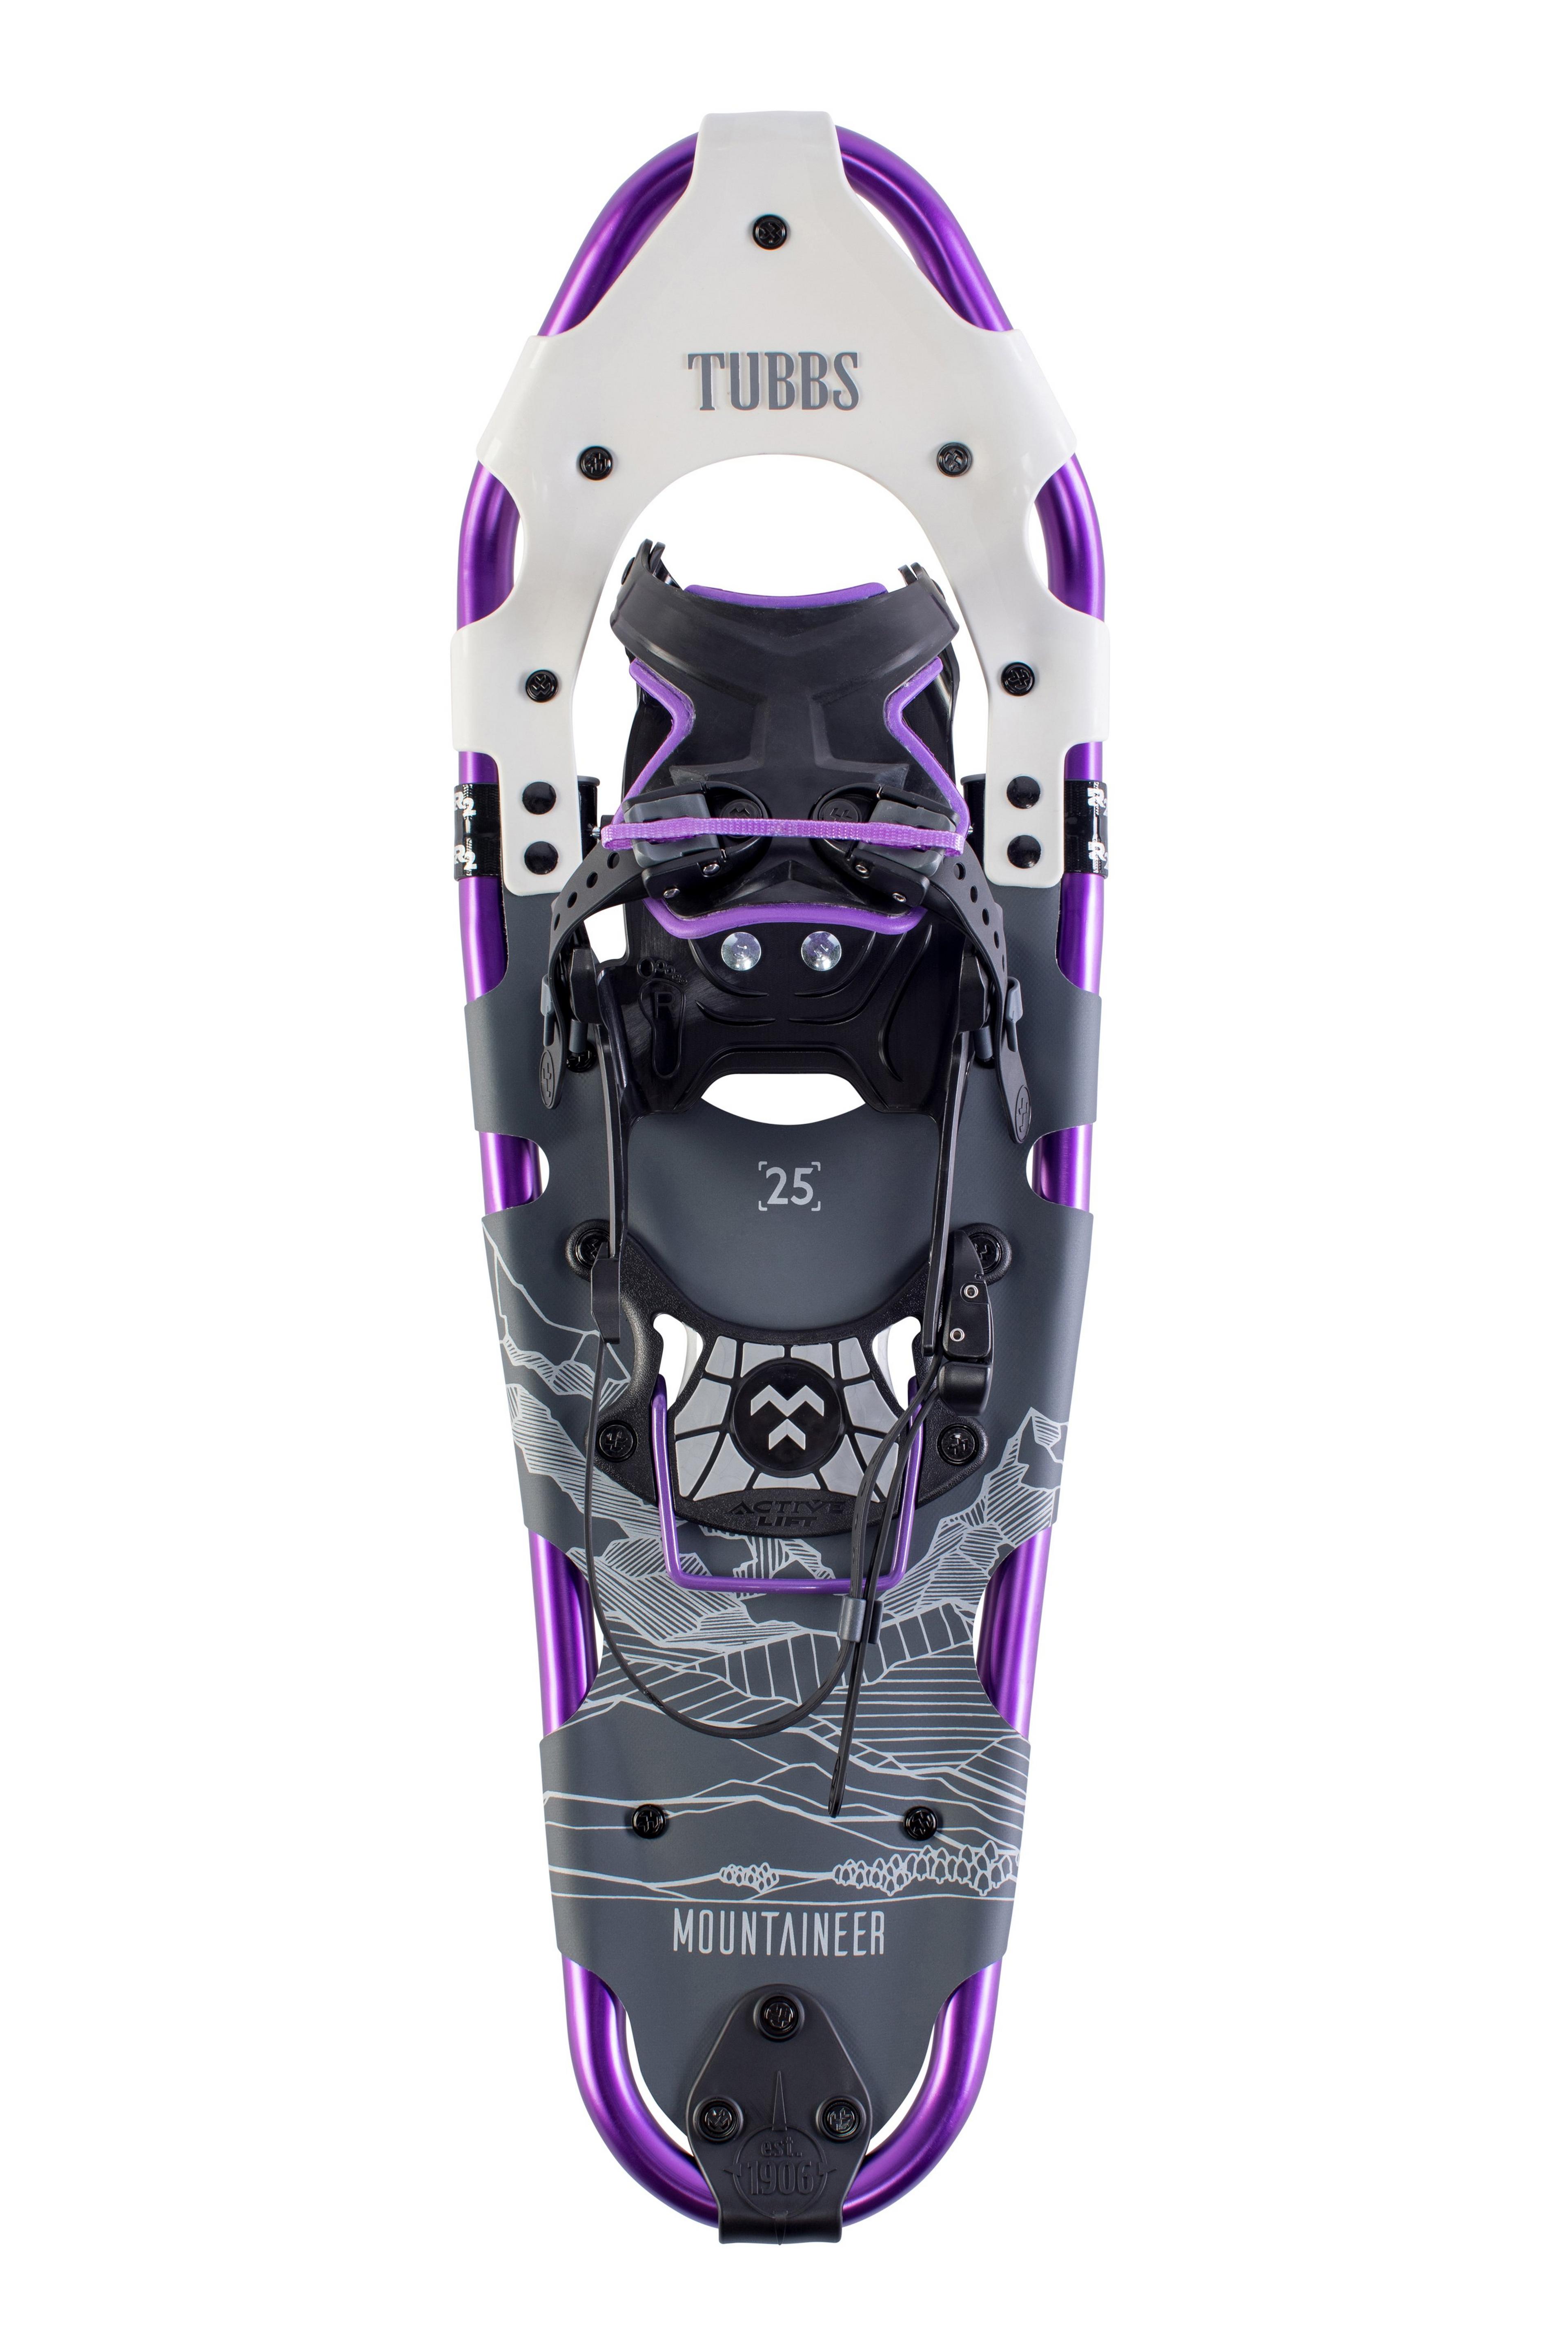 Tubbs Women's Mountaineer Snowshoes 25"